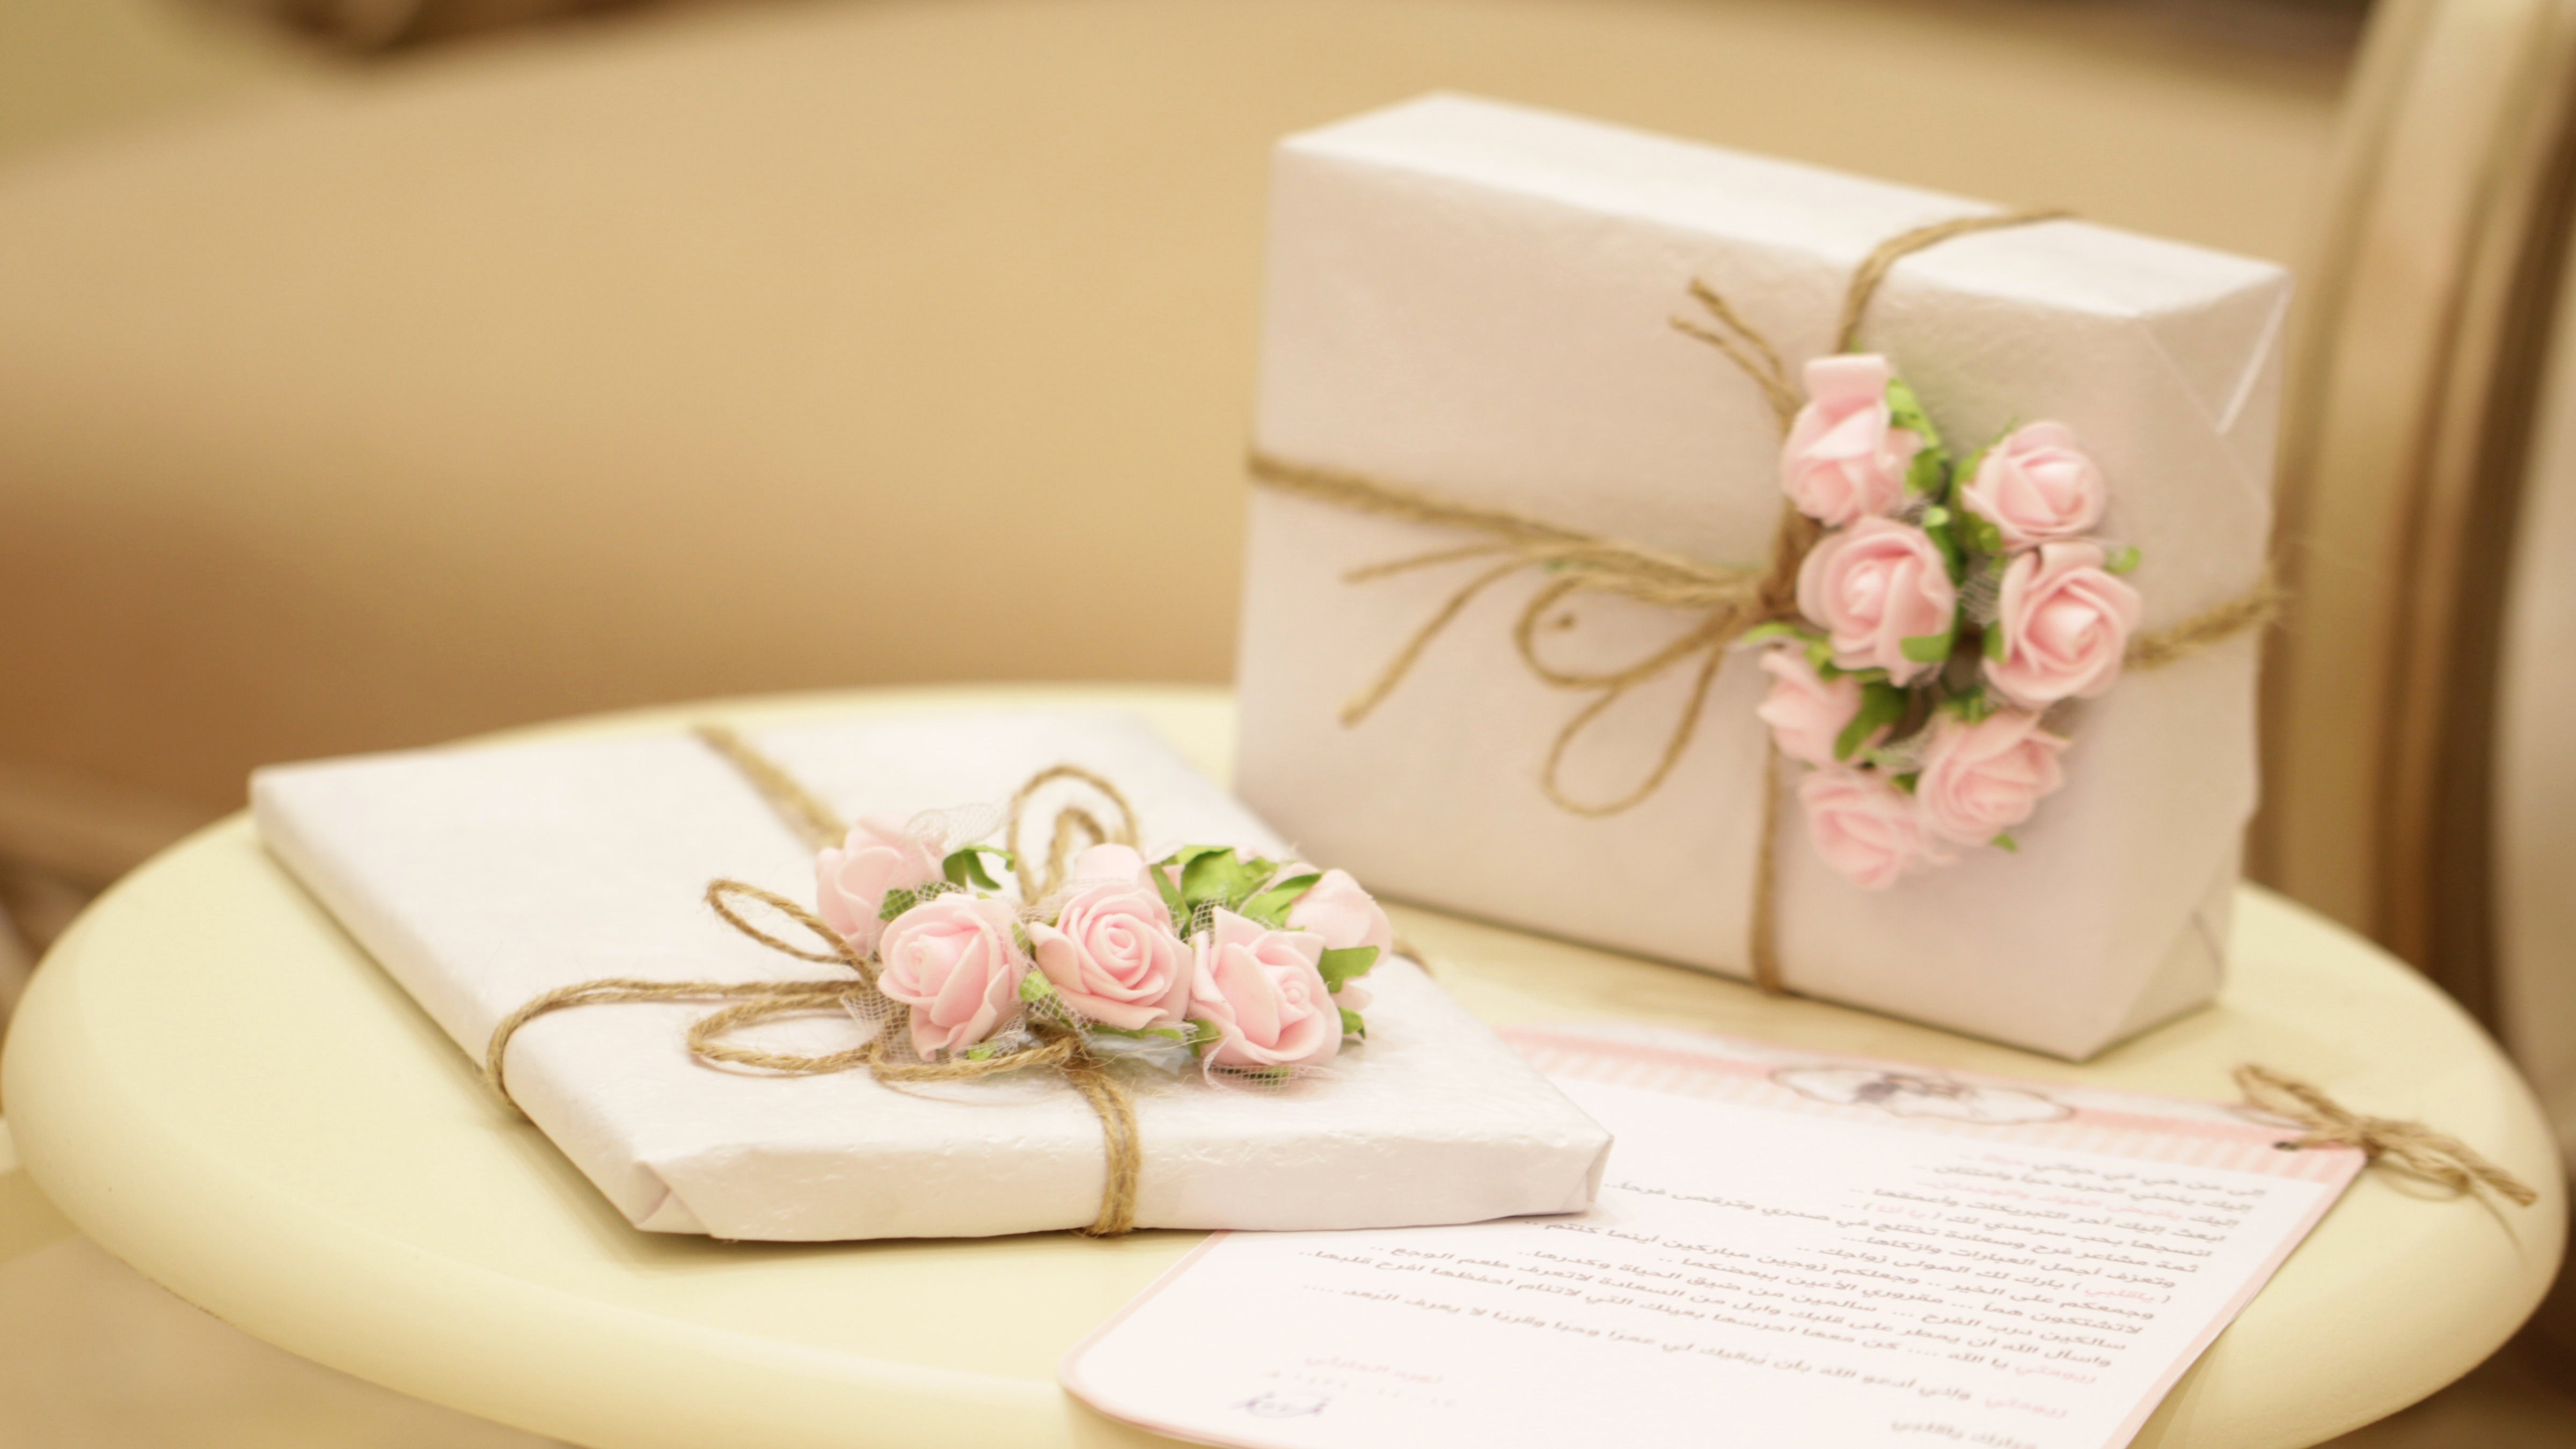 Two presents wrapped in white with pink roses attached to them